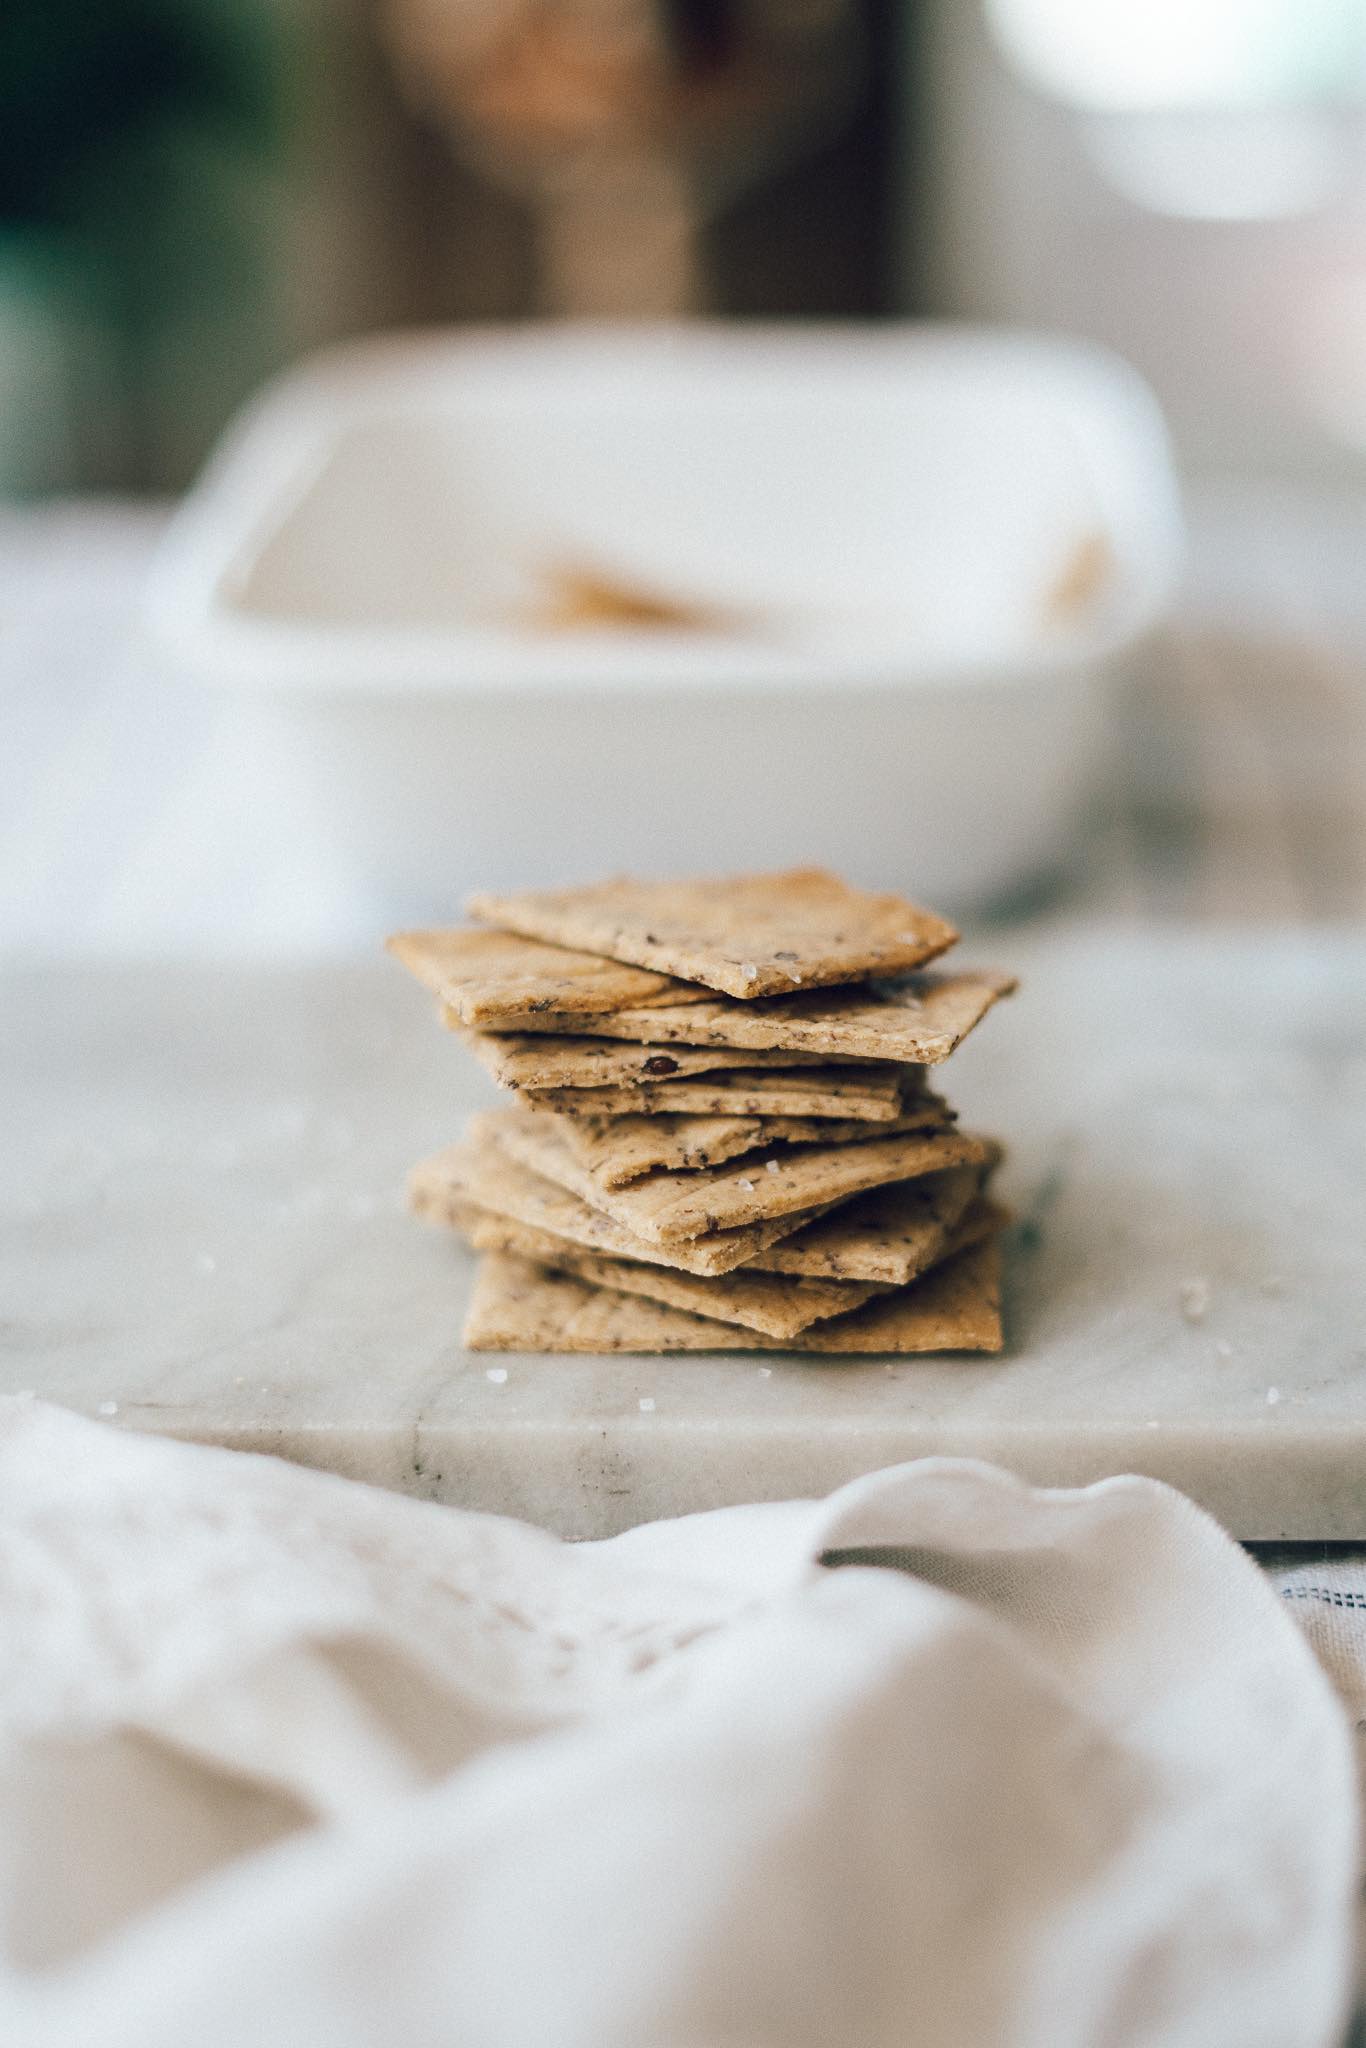 Homemade Gluten Free Crackers Recipe (Easy To Make) - Whole Grain Crackers - No Gums or Starches